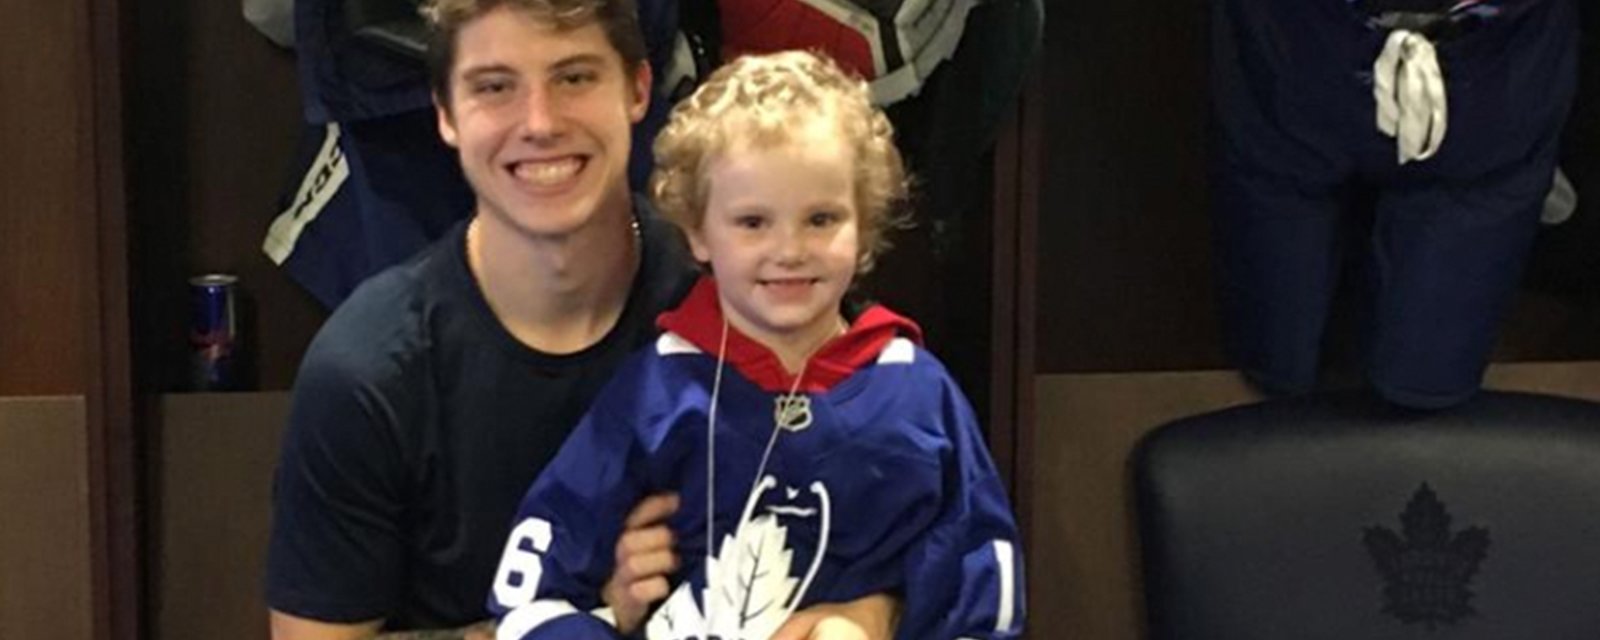 The story of Mitch Marner and how he inspired a six year old girl to beat cancer